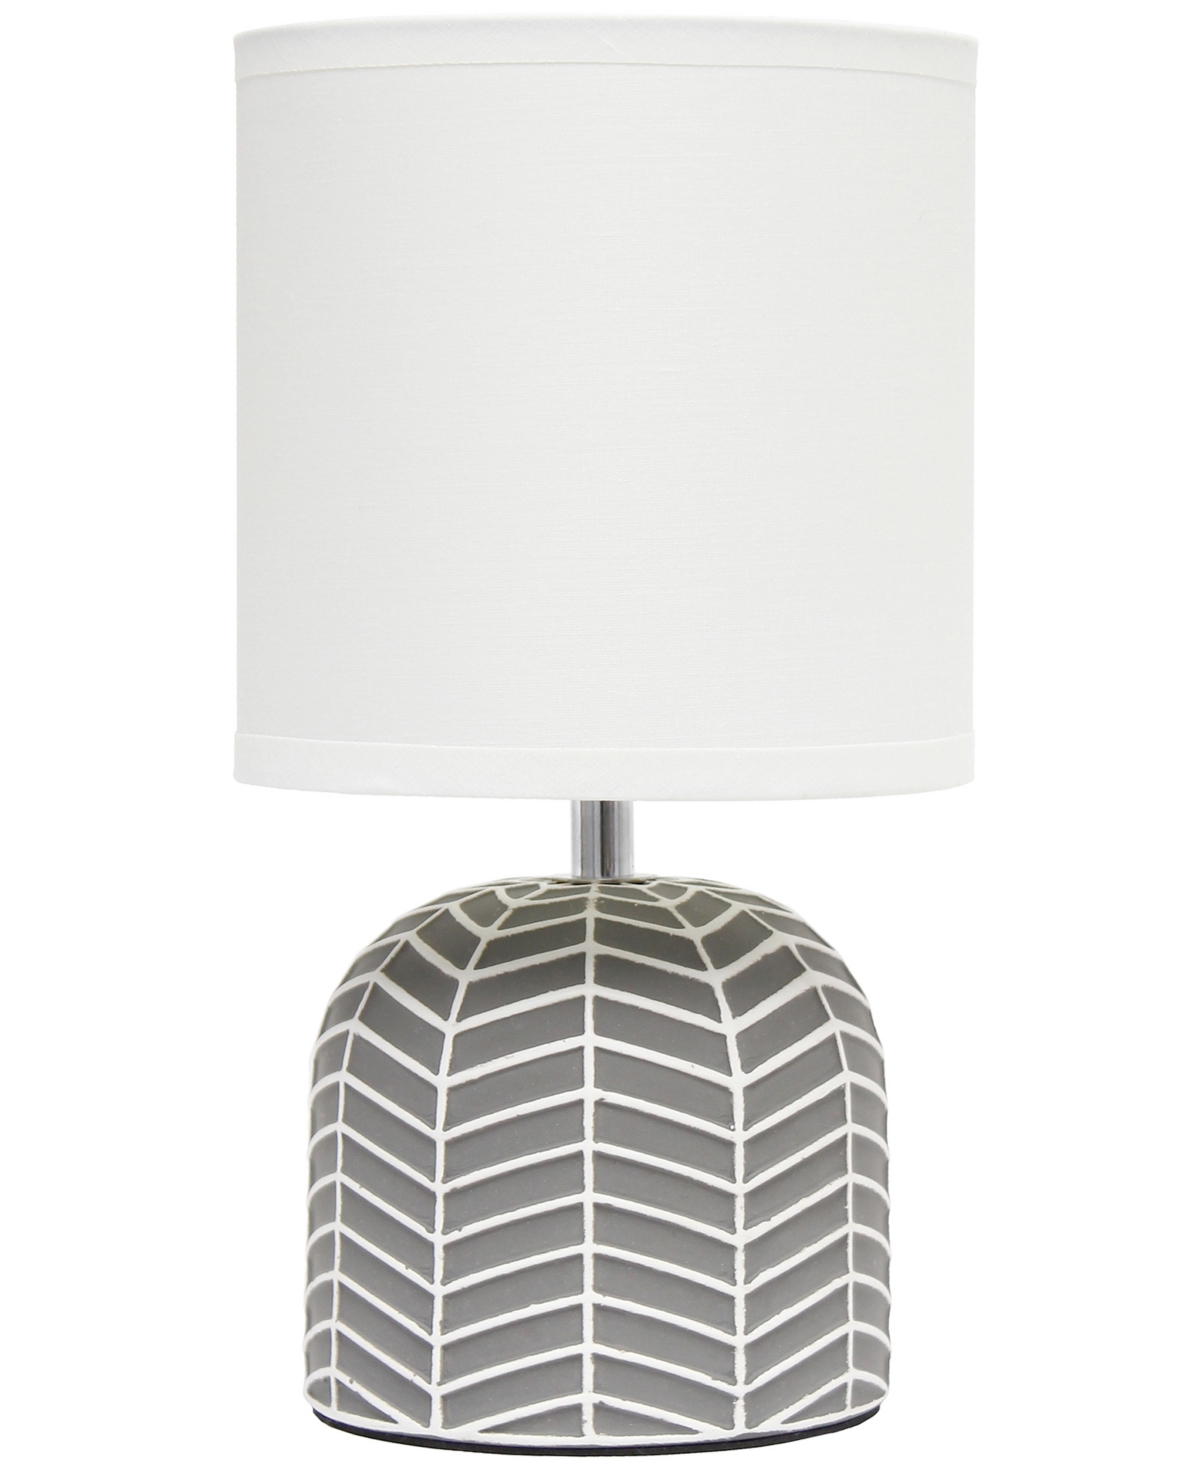 Shop Simple Designs 10.43" Petite Contemporary Webbed Waves Base Bedside Table Desk Lamp With White Fabric Drum Shade In Gray